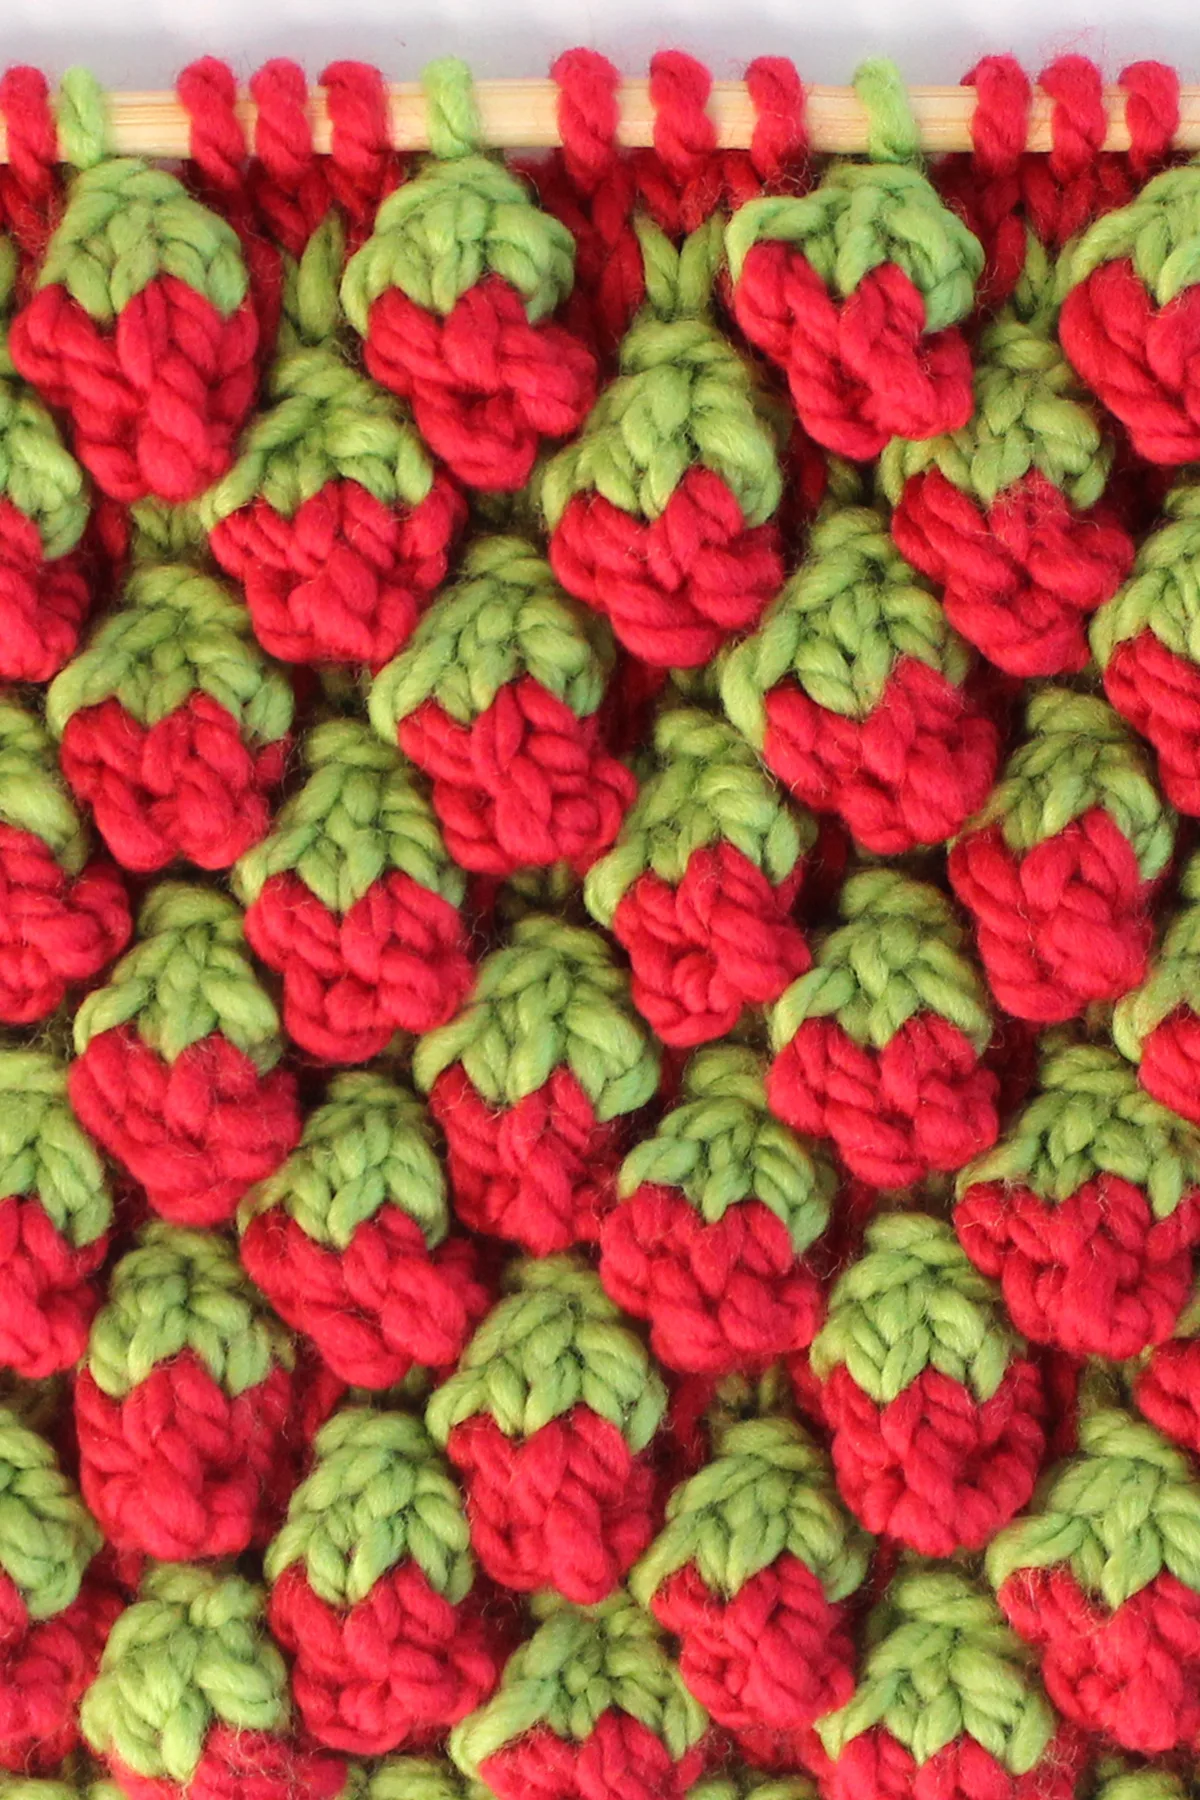 Strawberry knit stitch bobble pattern in red and green colored yarn on a knitting needle.